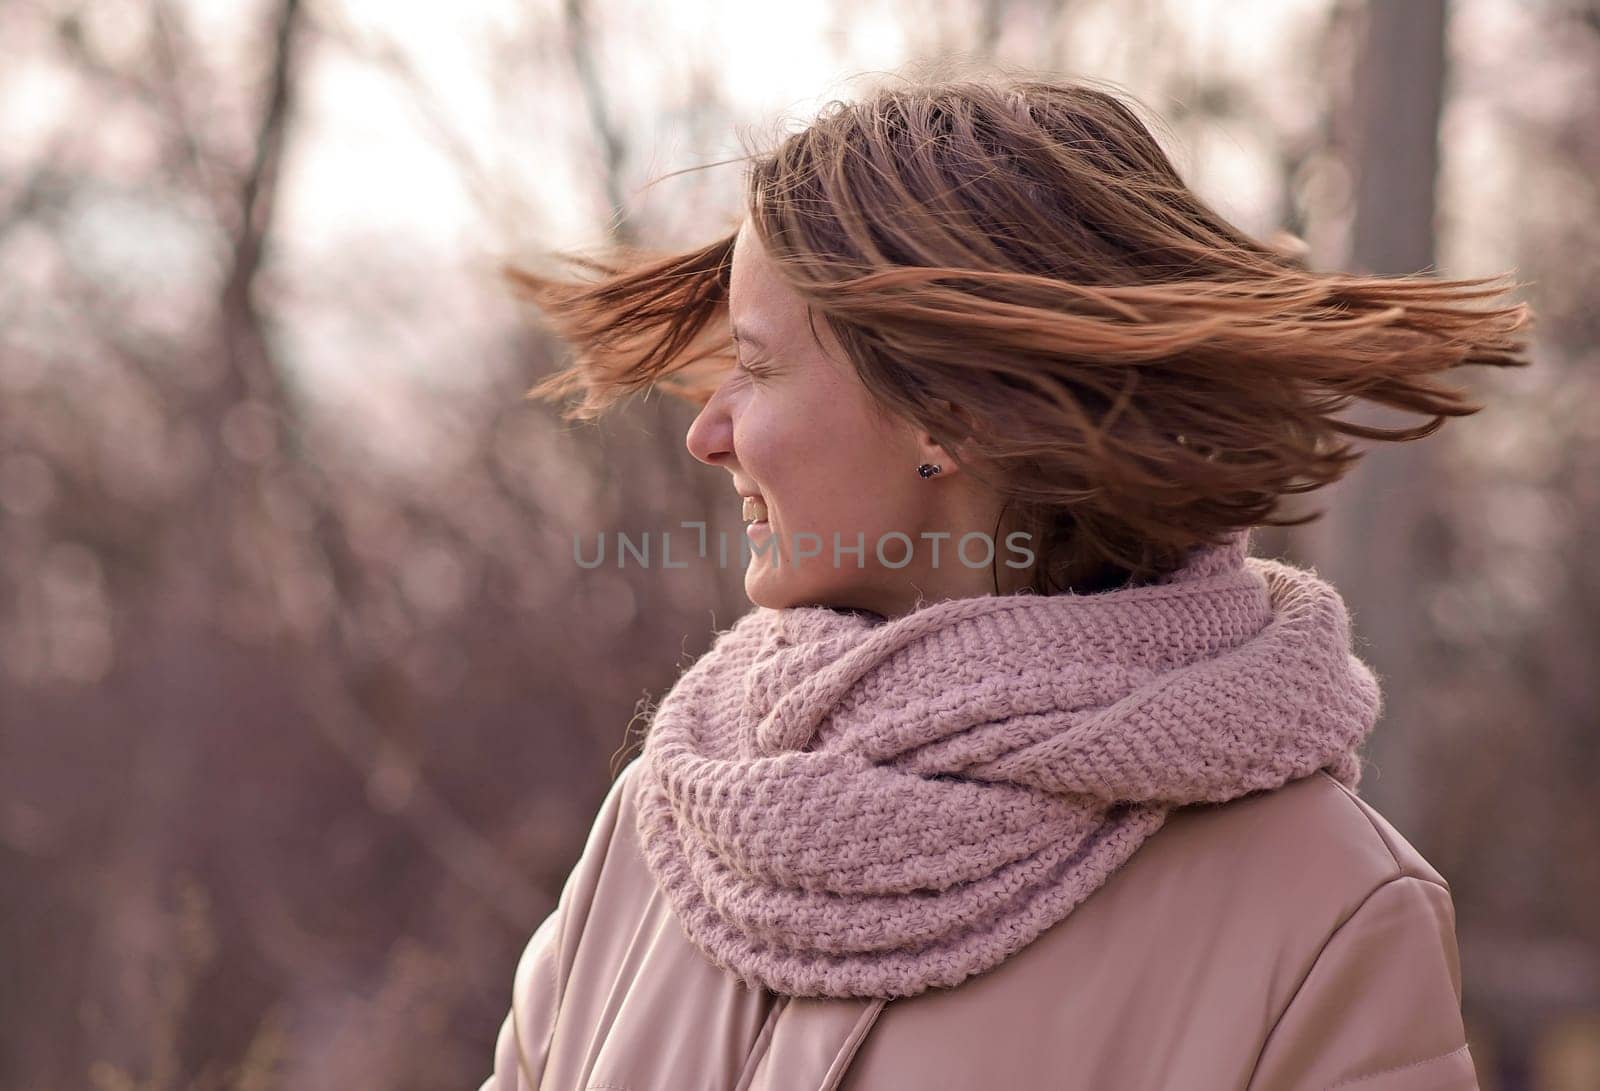 candid attractive young smiling woman walking in park, happy mood, fashion style trend, pink jacket, waving brown hair